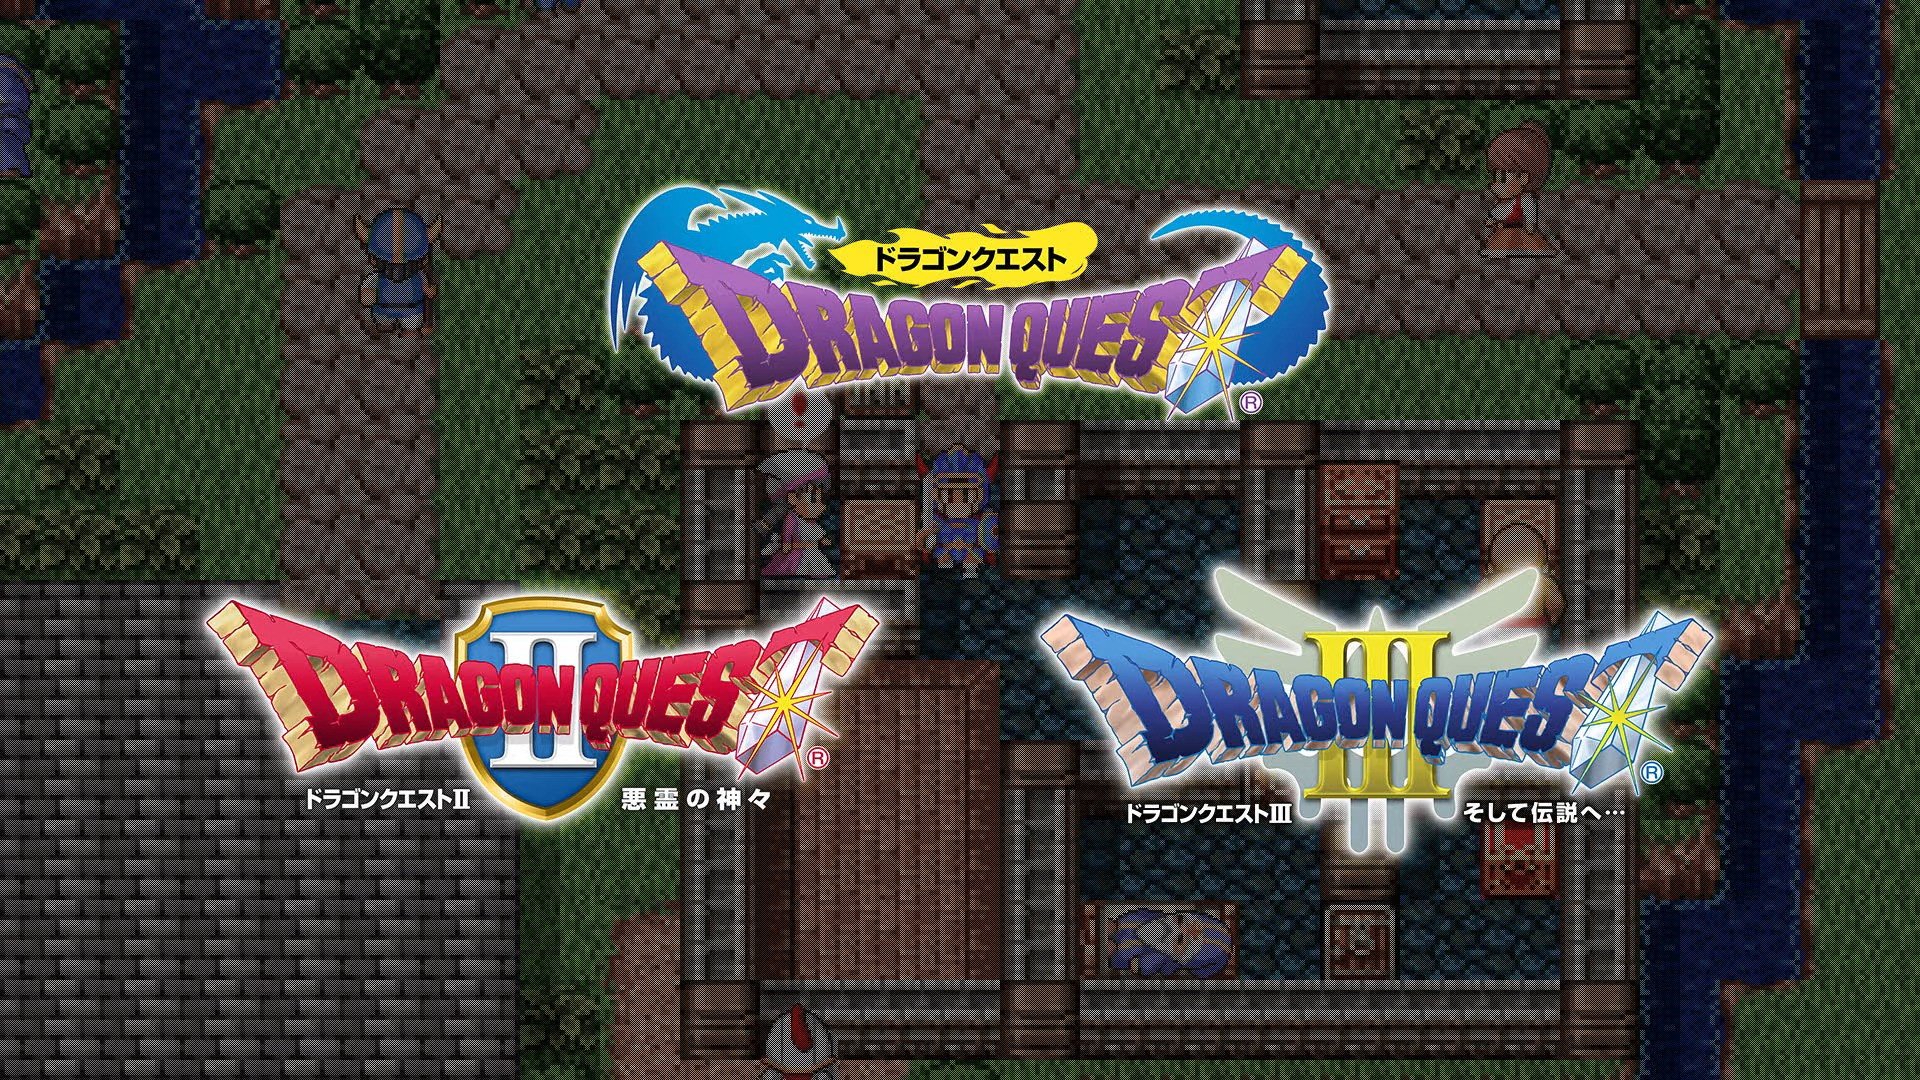 The First Three Dragon Quest Games Will Be Released On The Switch Eshop In Japan Nintendo Life